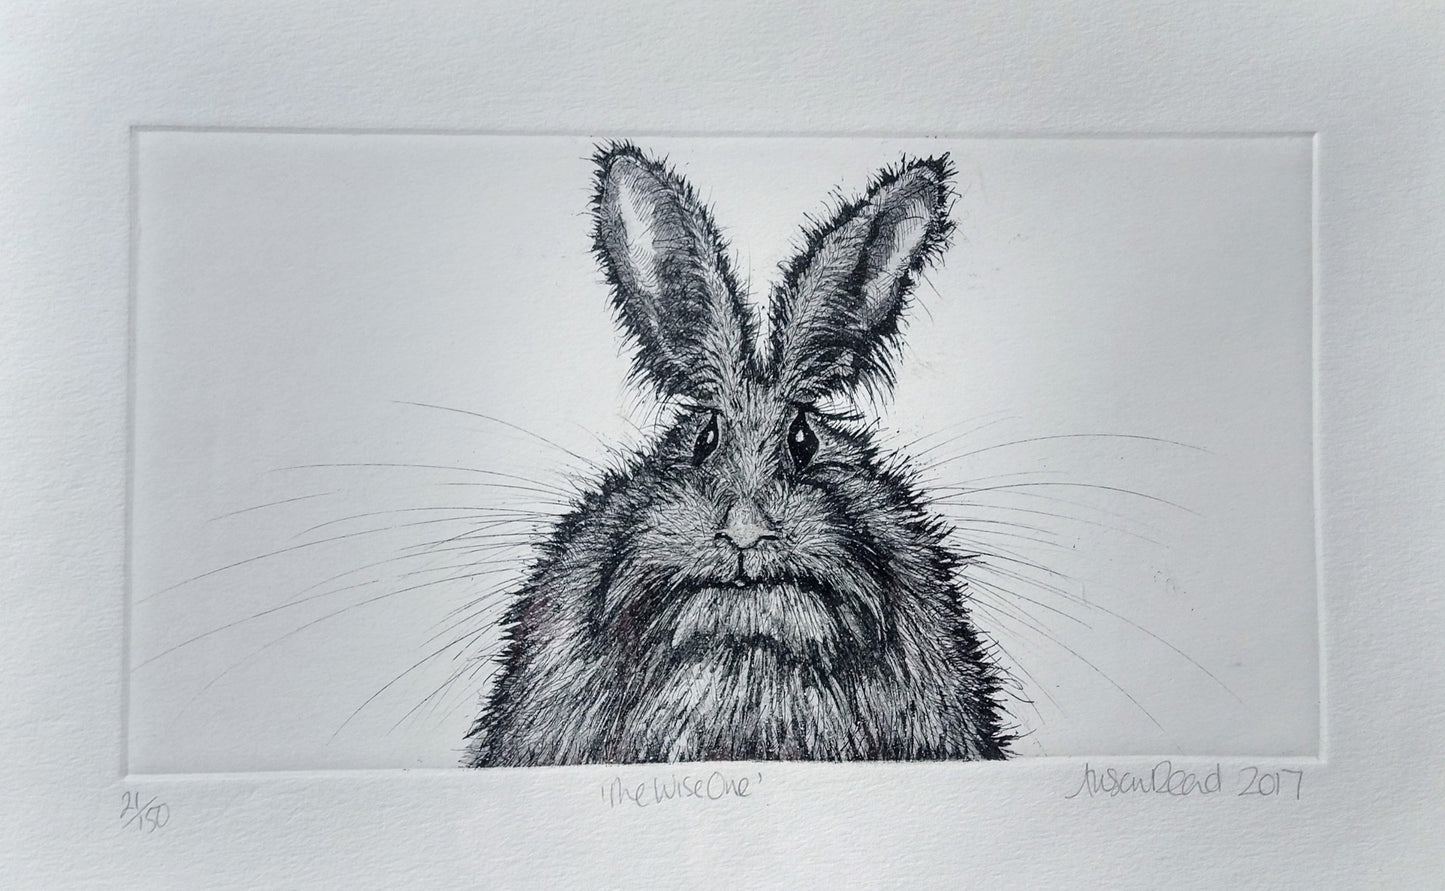 Alison Read - Etching- Rabbit art- "The Wise One"